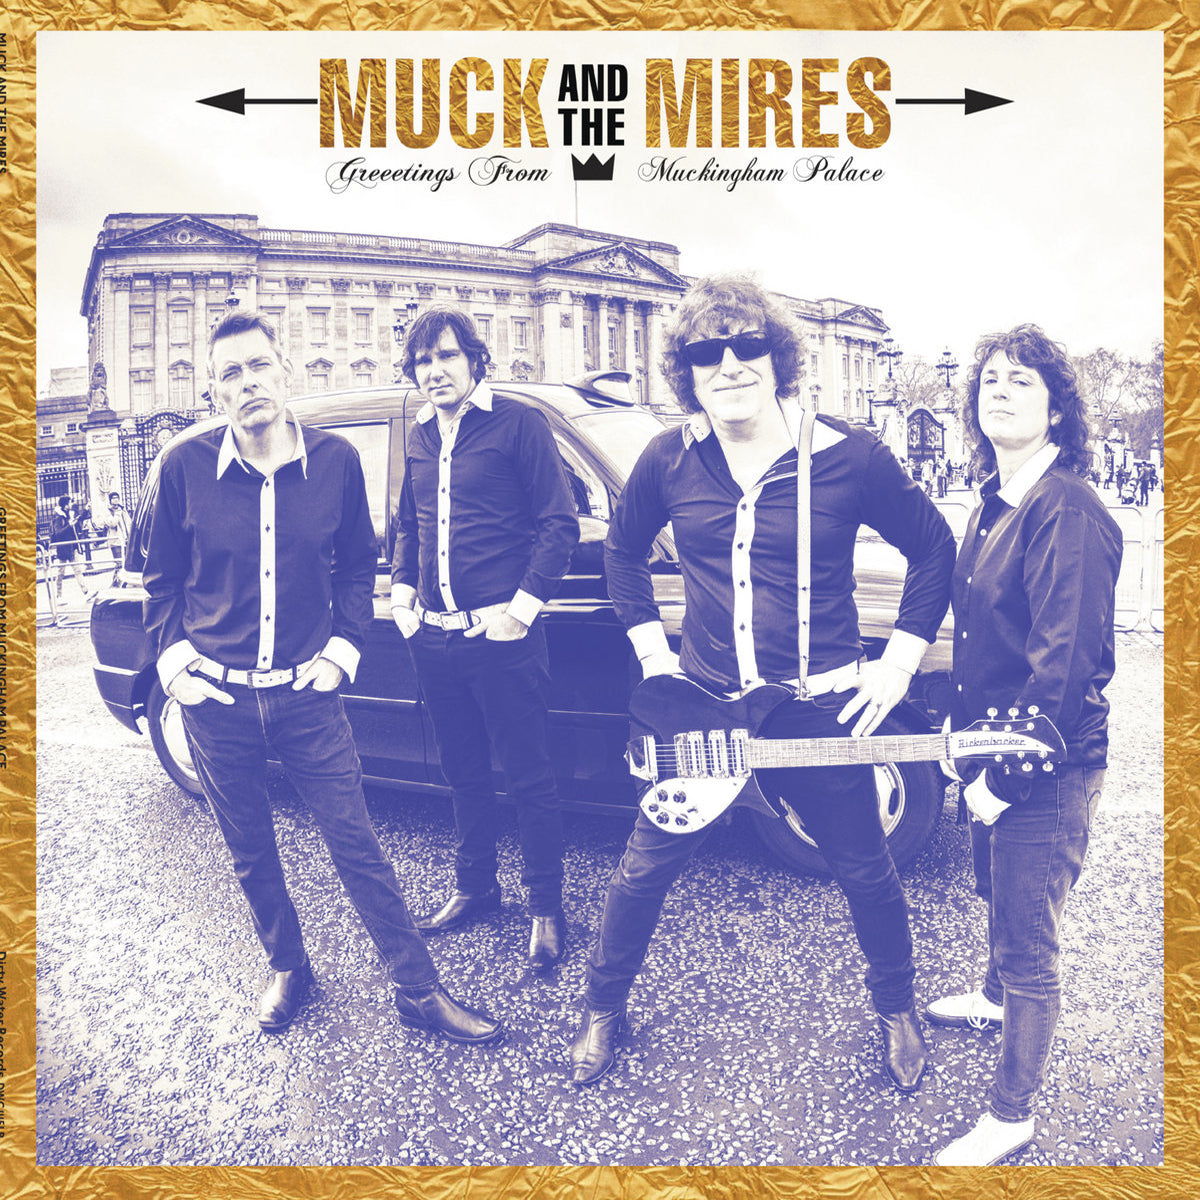 Muck And The Mires- Greeting From Muckingham Palace CD